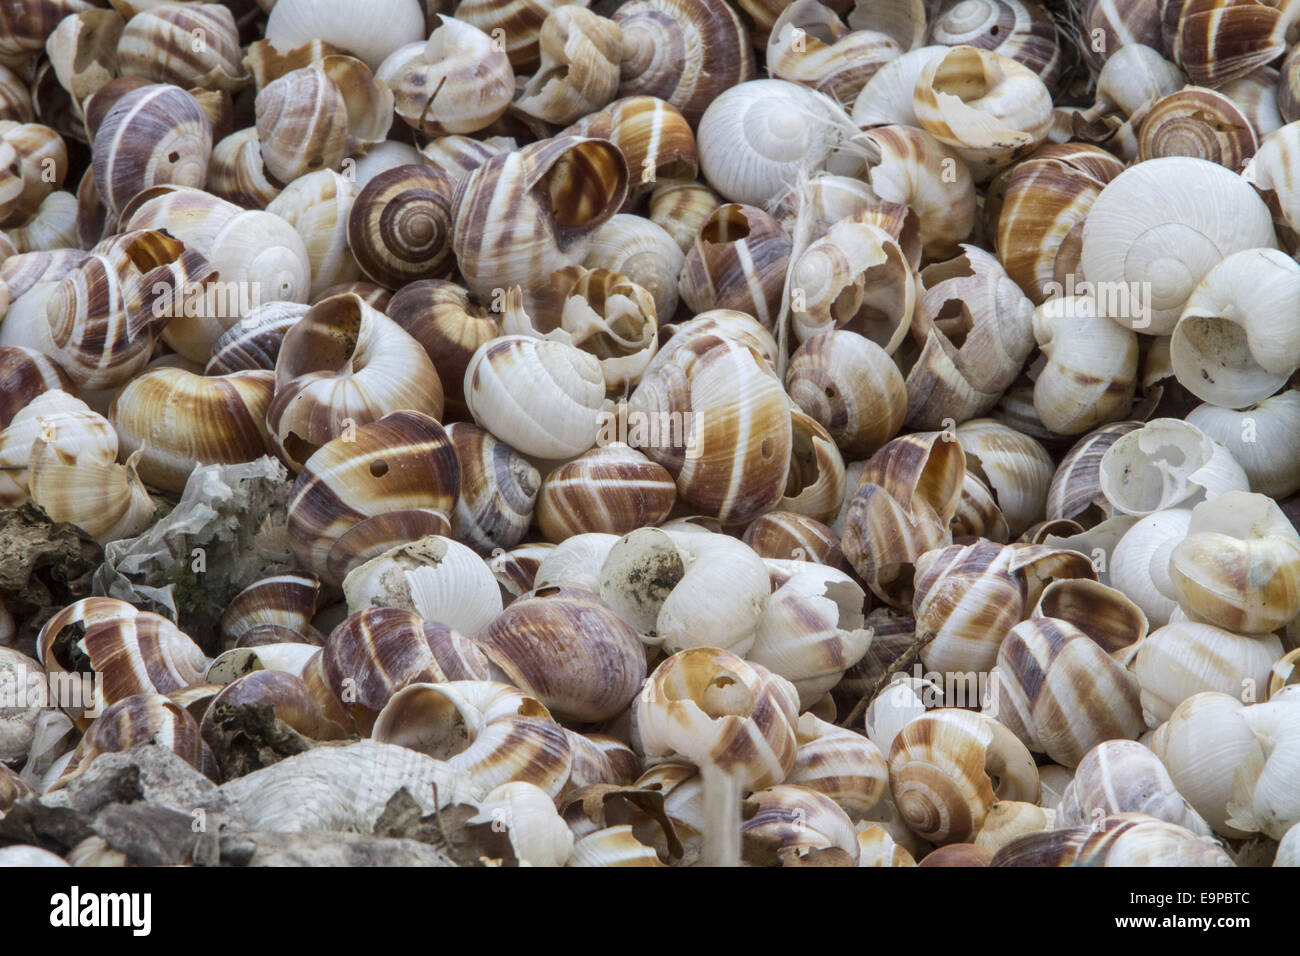 Shells of Helix lucorum is a species of large, edible, air-breathing land snail or escargot, a terrestrial pulmonate gastropod mollusk in the family Helicidae. Commonly found in eastern Europe - Bulgaria. Stock Photo